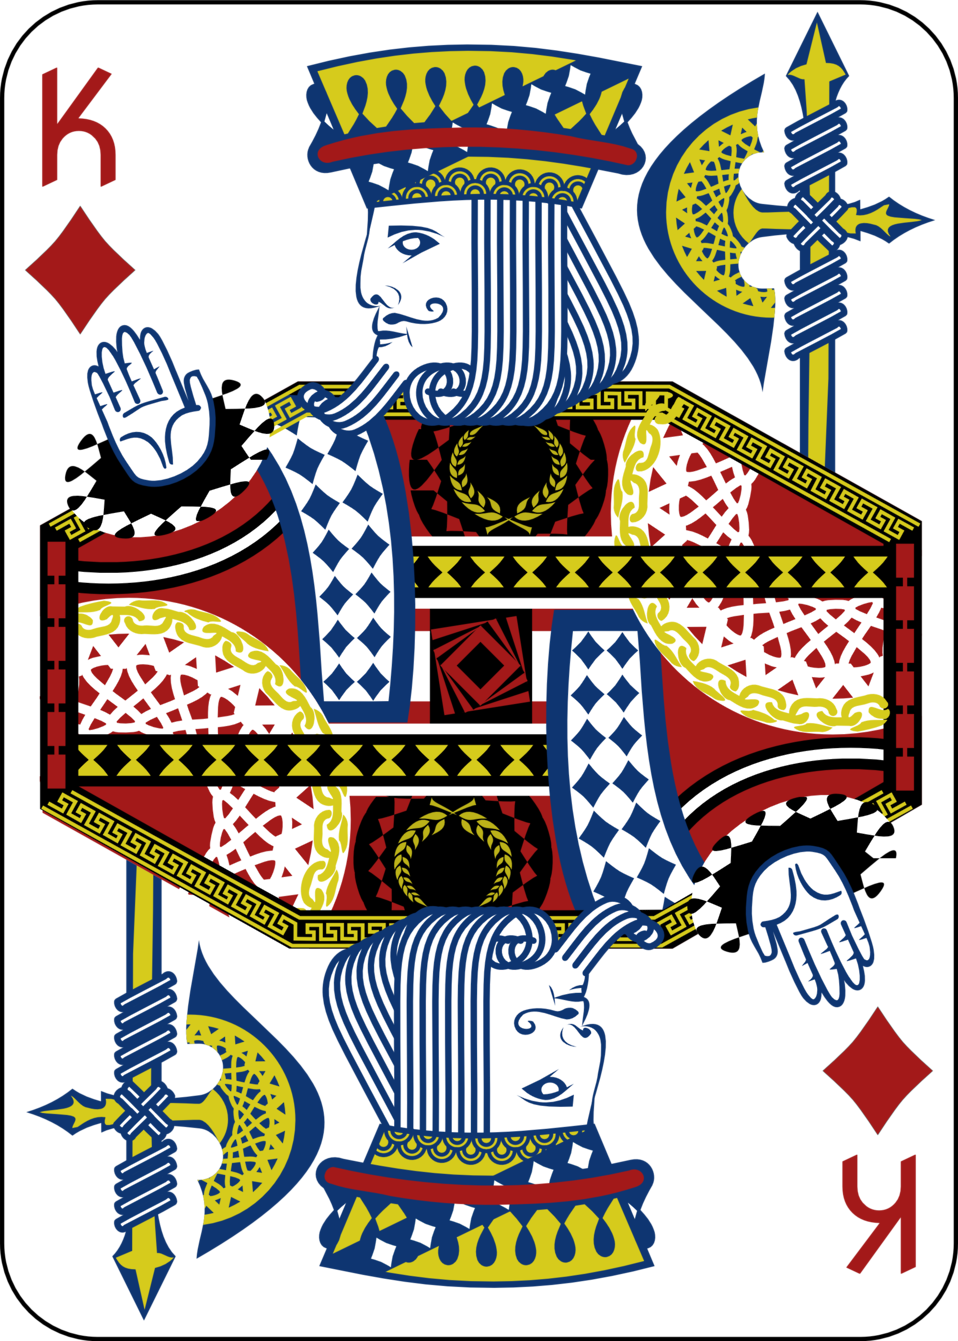 king clipart file